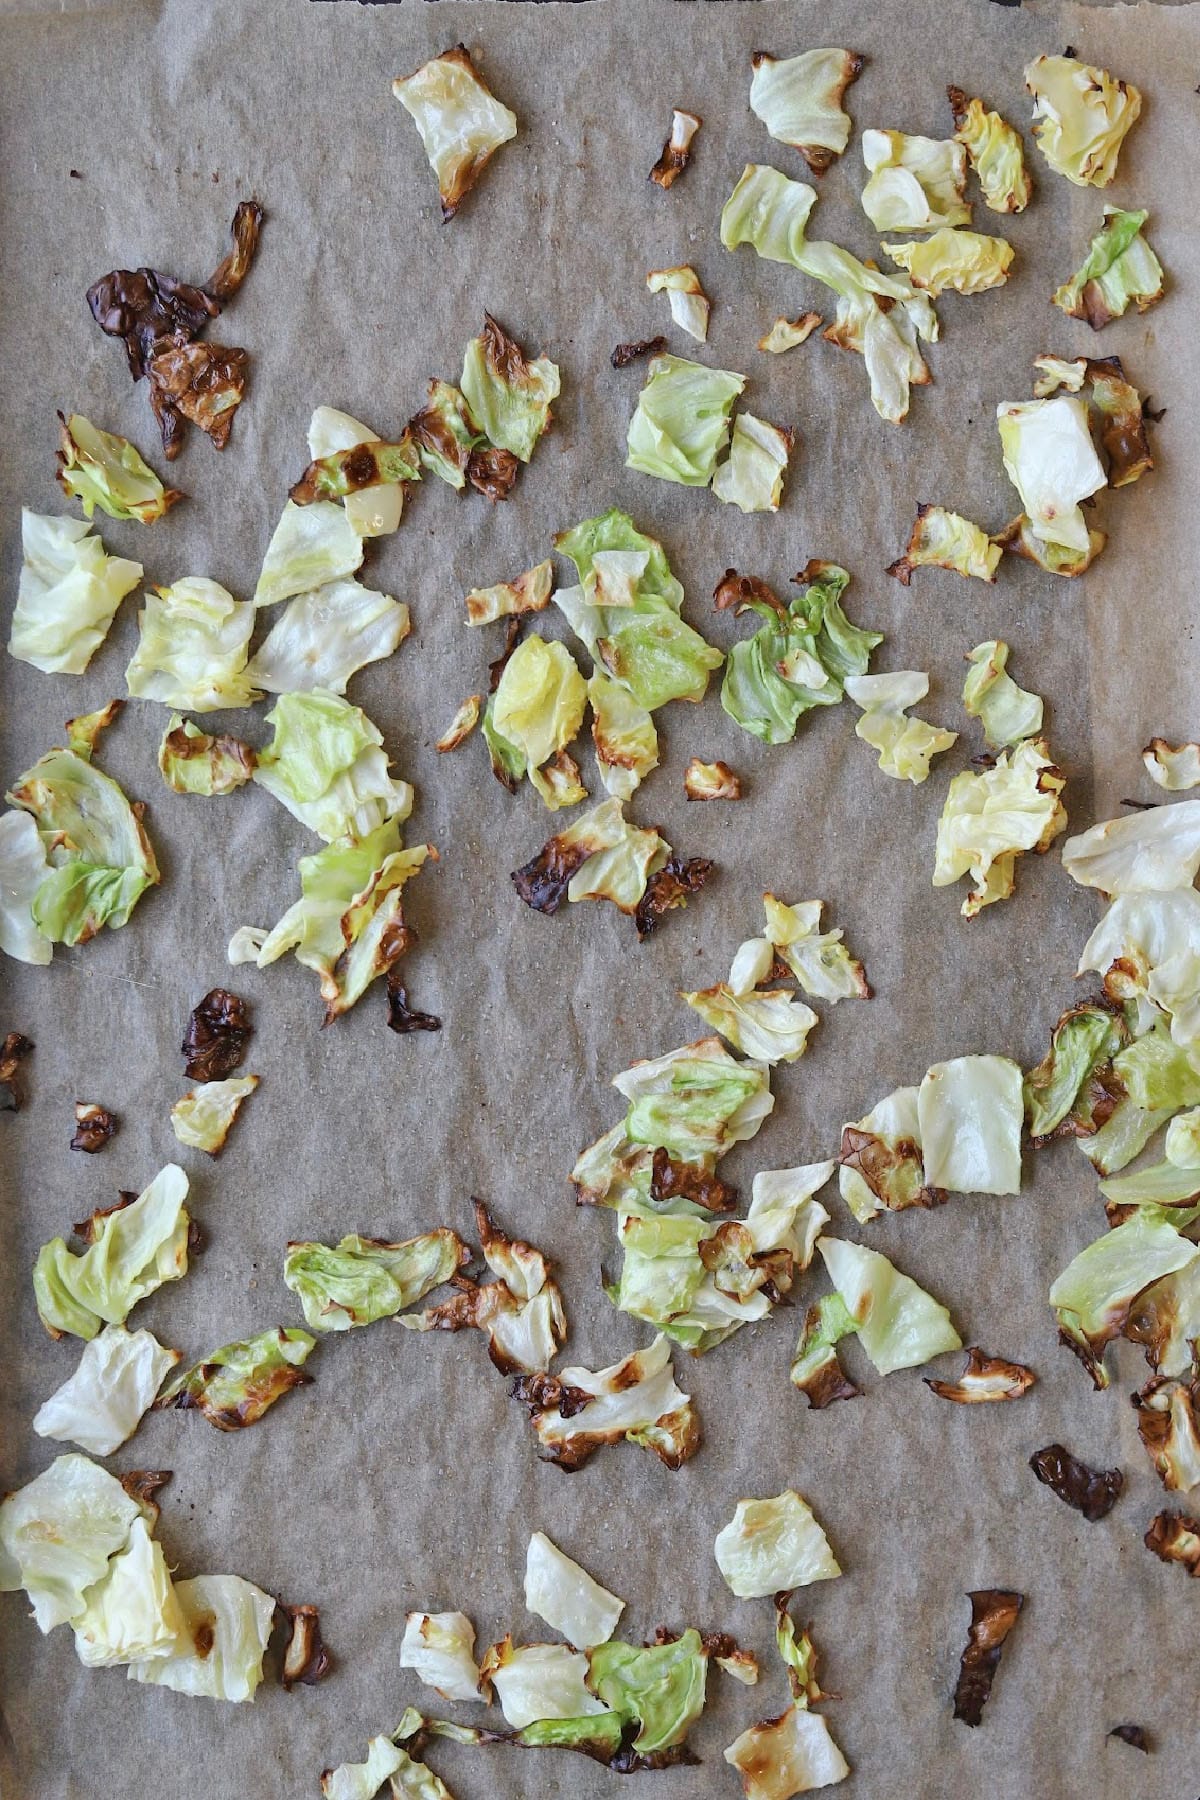 Roasted cabbage pieces on parchment paper lined baking sheet.